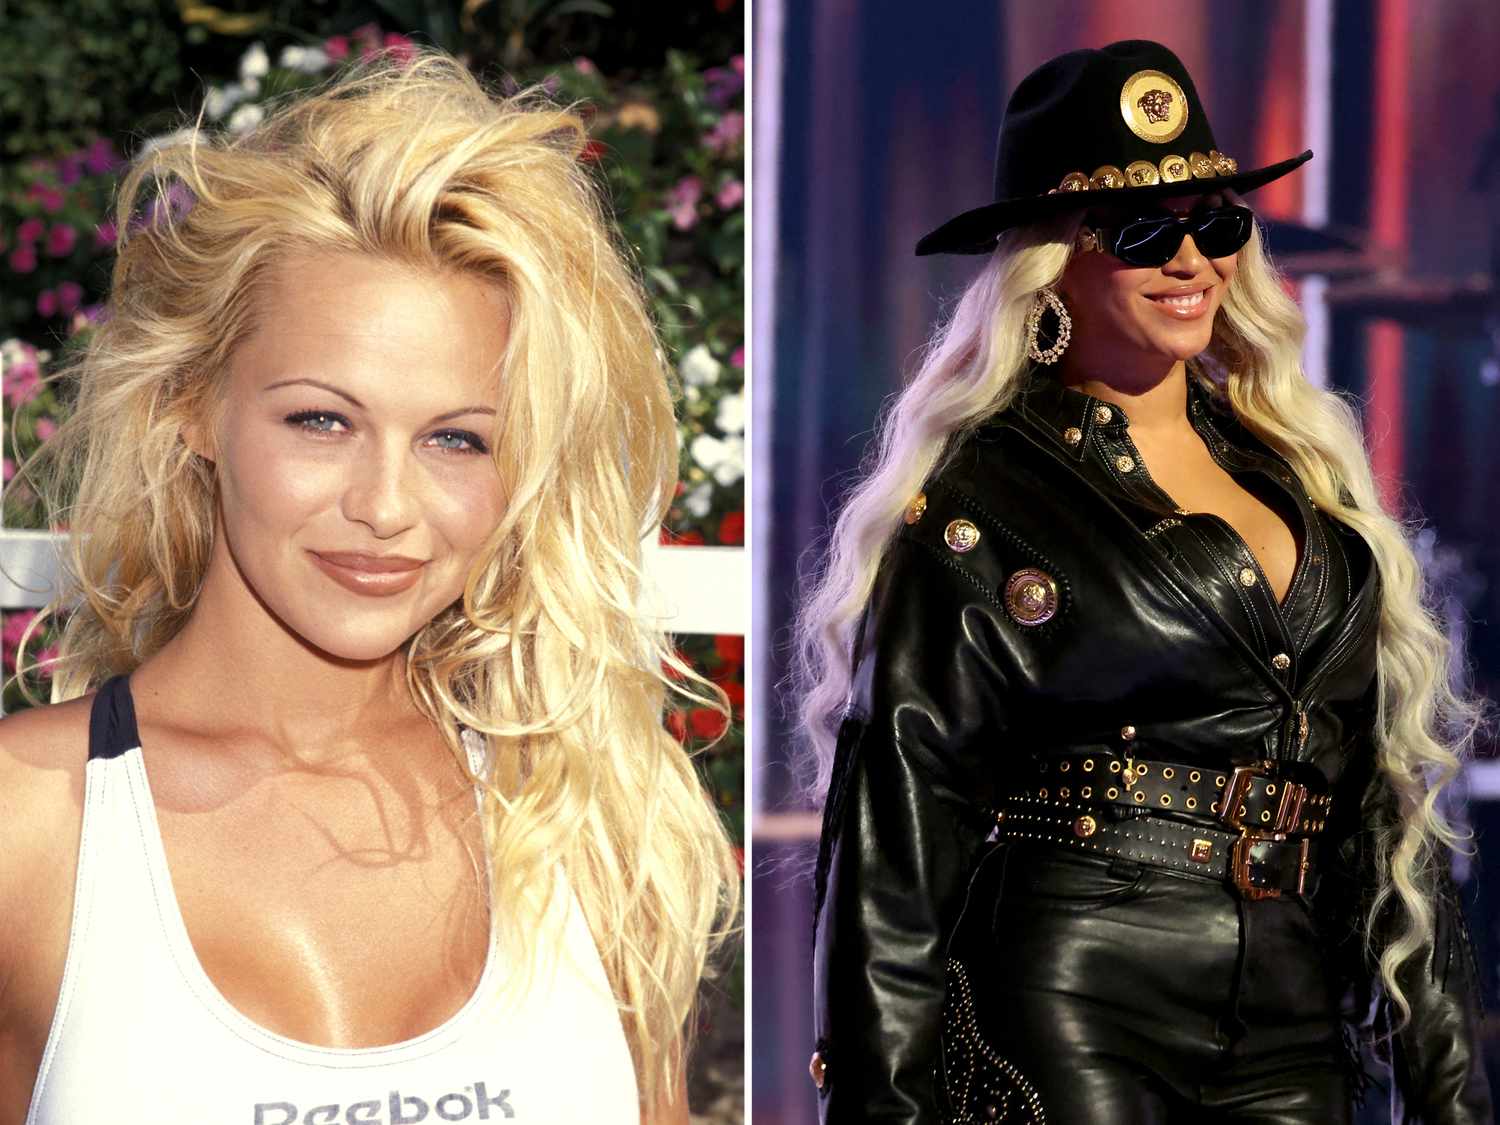 Side-by-side photos of pamela anderson and beyonce wearing blonde hair